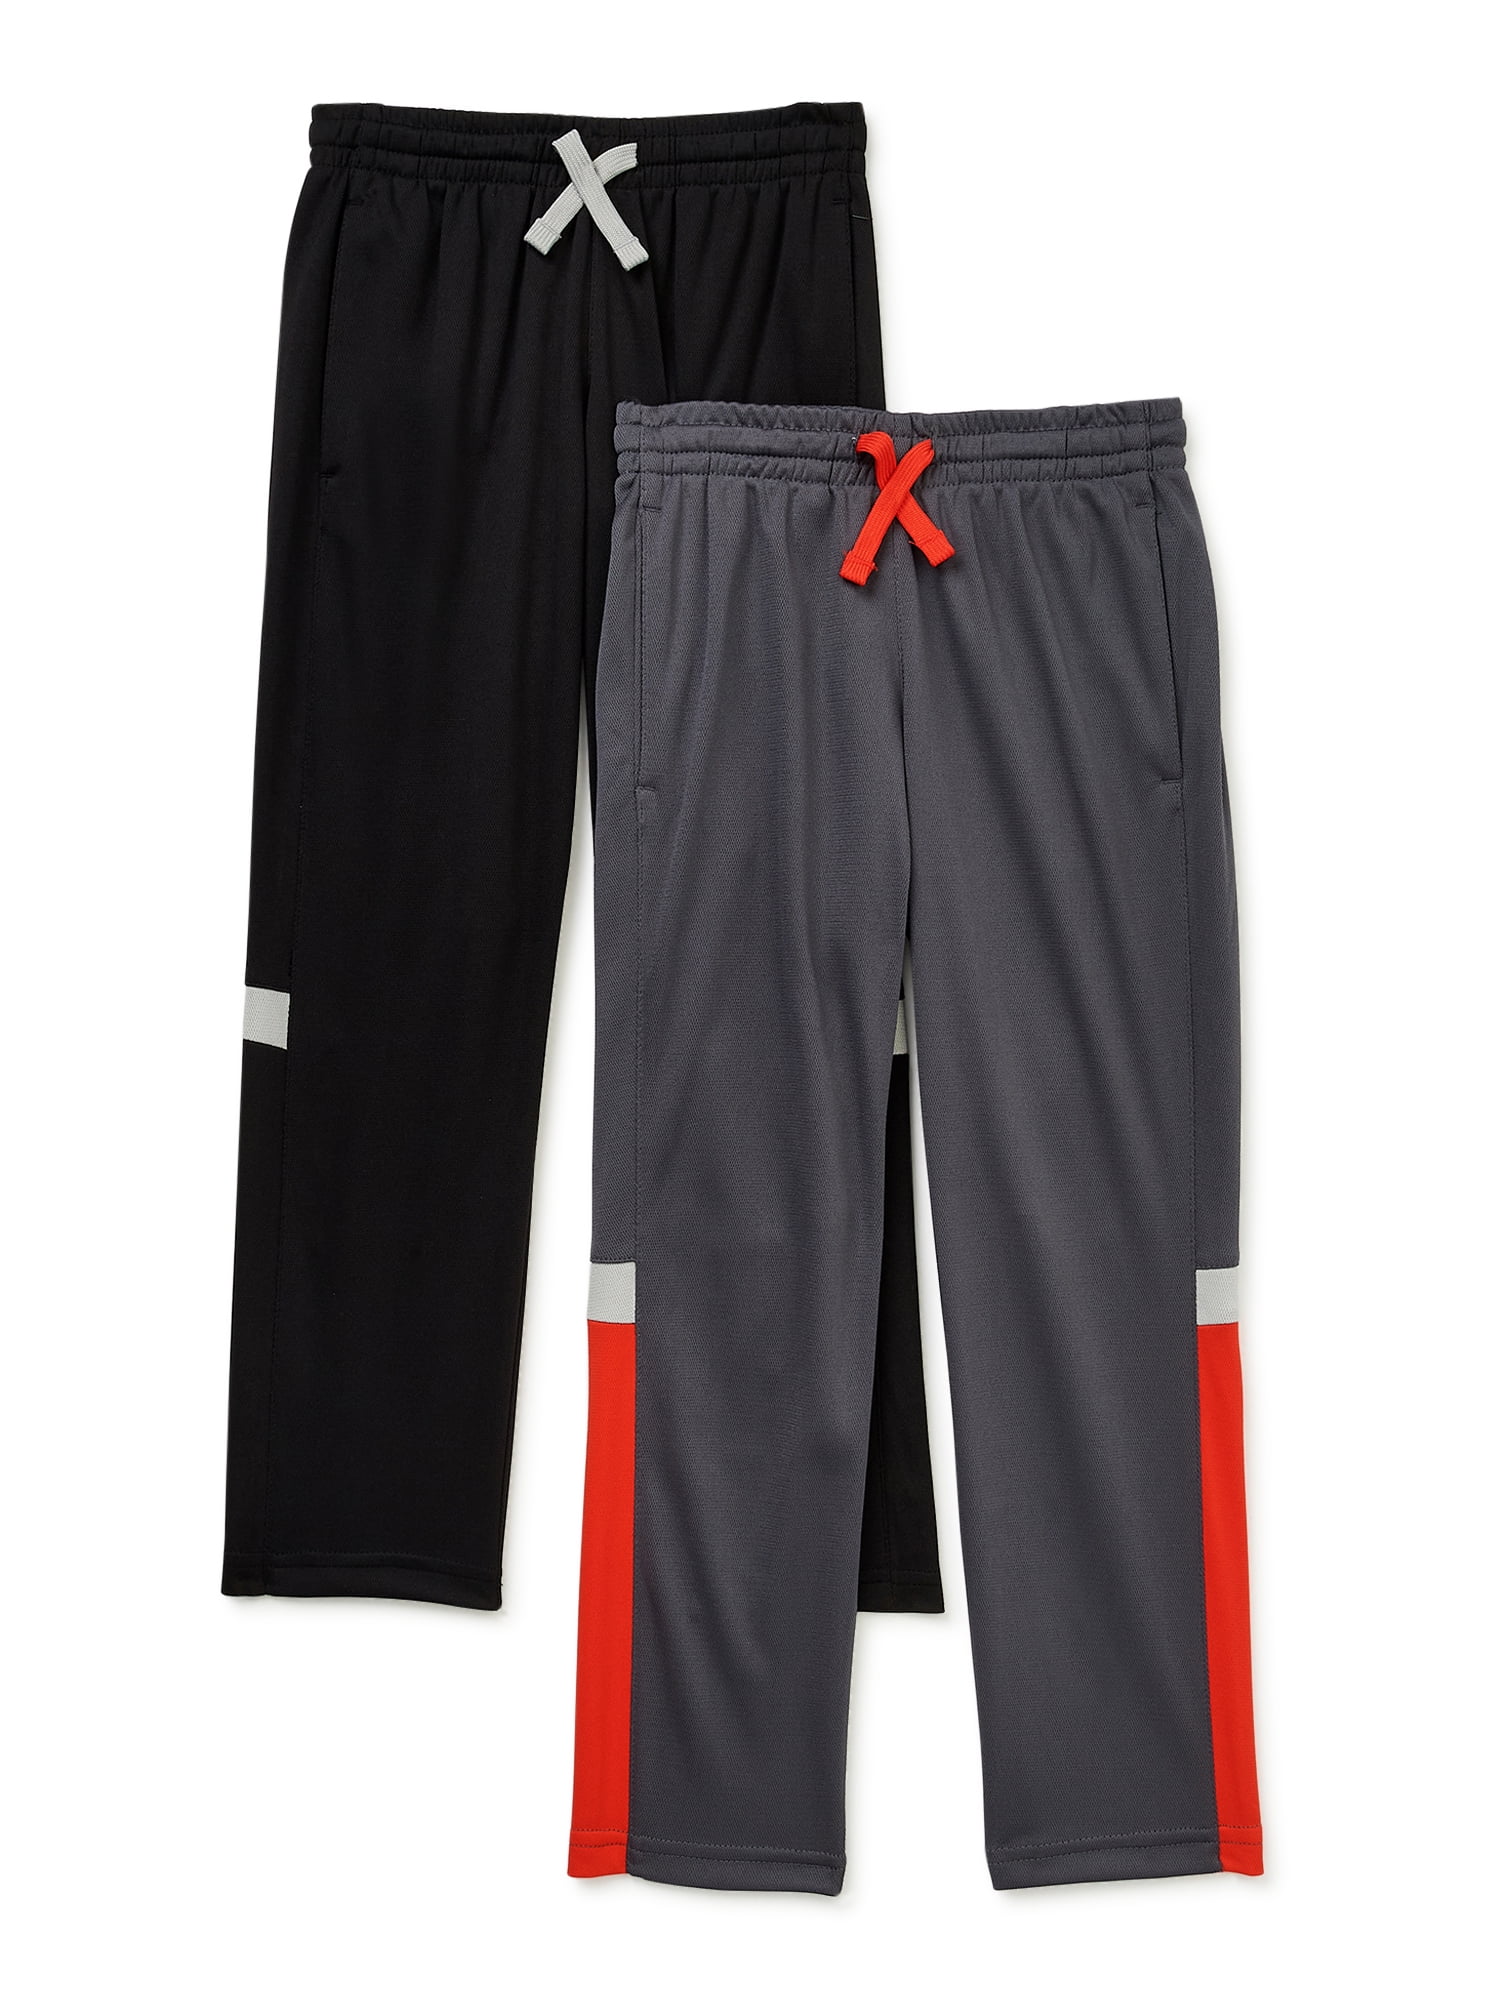 Athletic Works Boys' Active Pants, 2-Pack, Sizes 4-18 & Husky